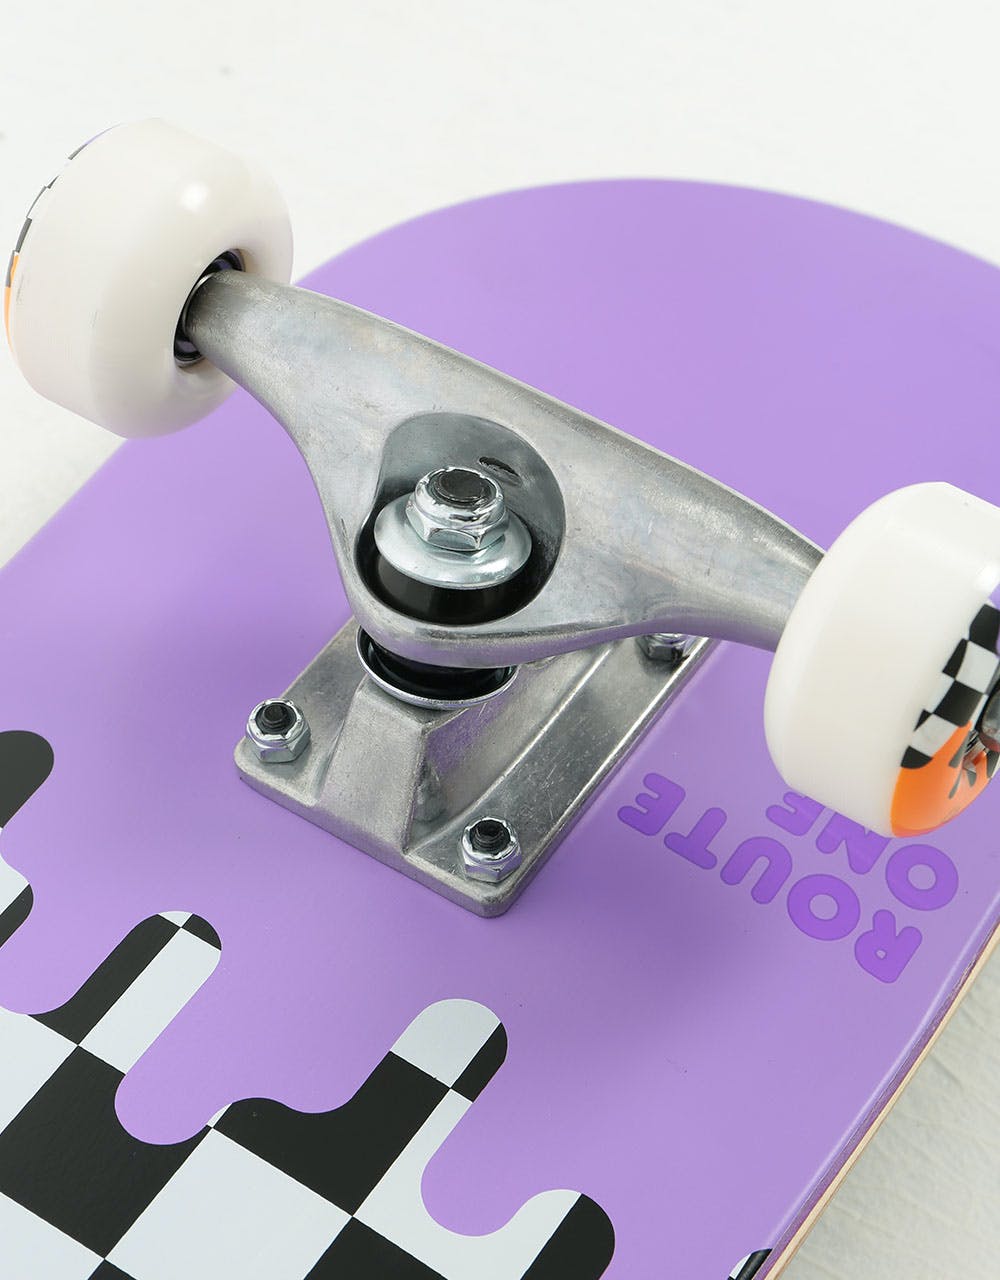 Route One Check Drip Complete Skateboard - 7.25"